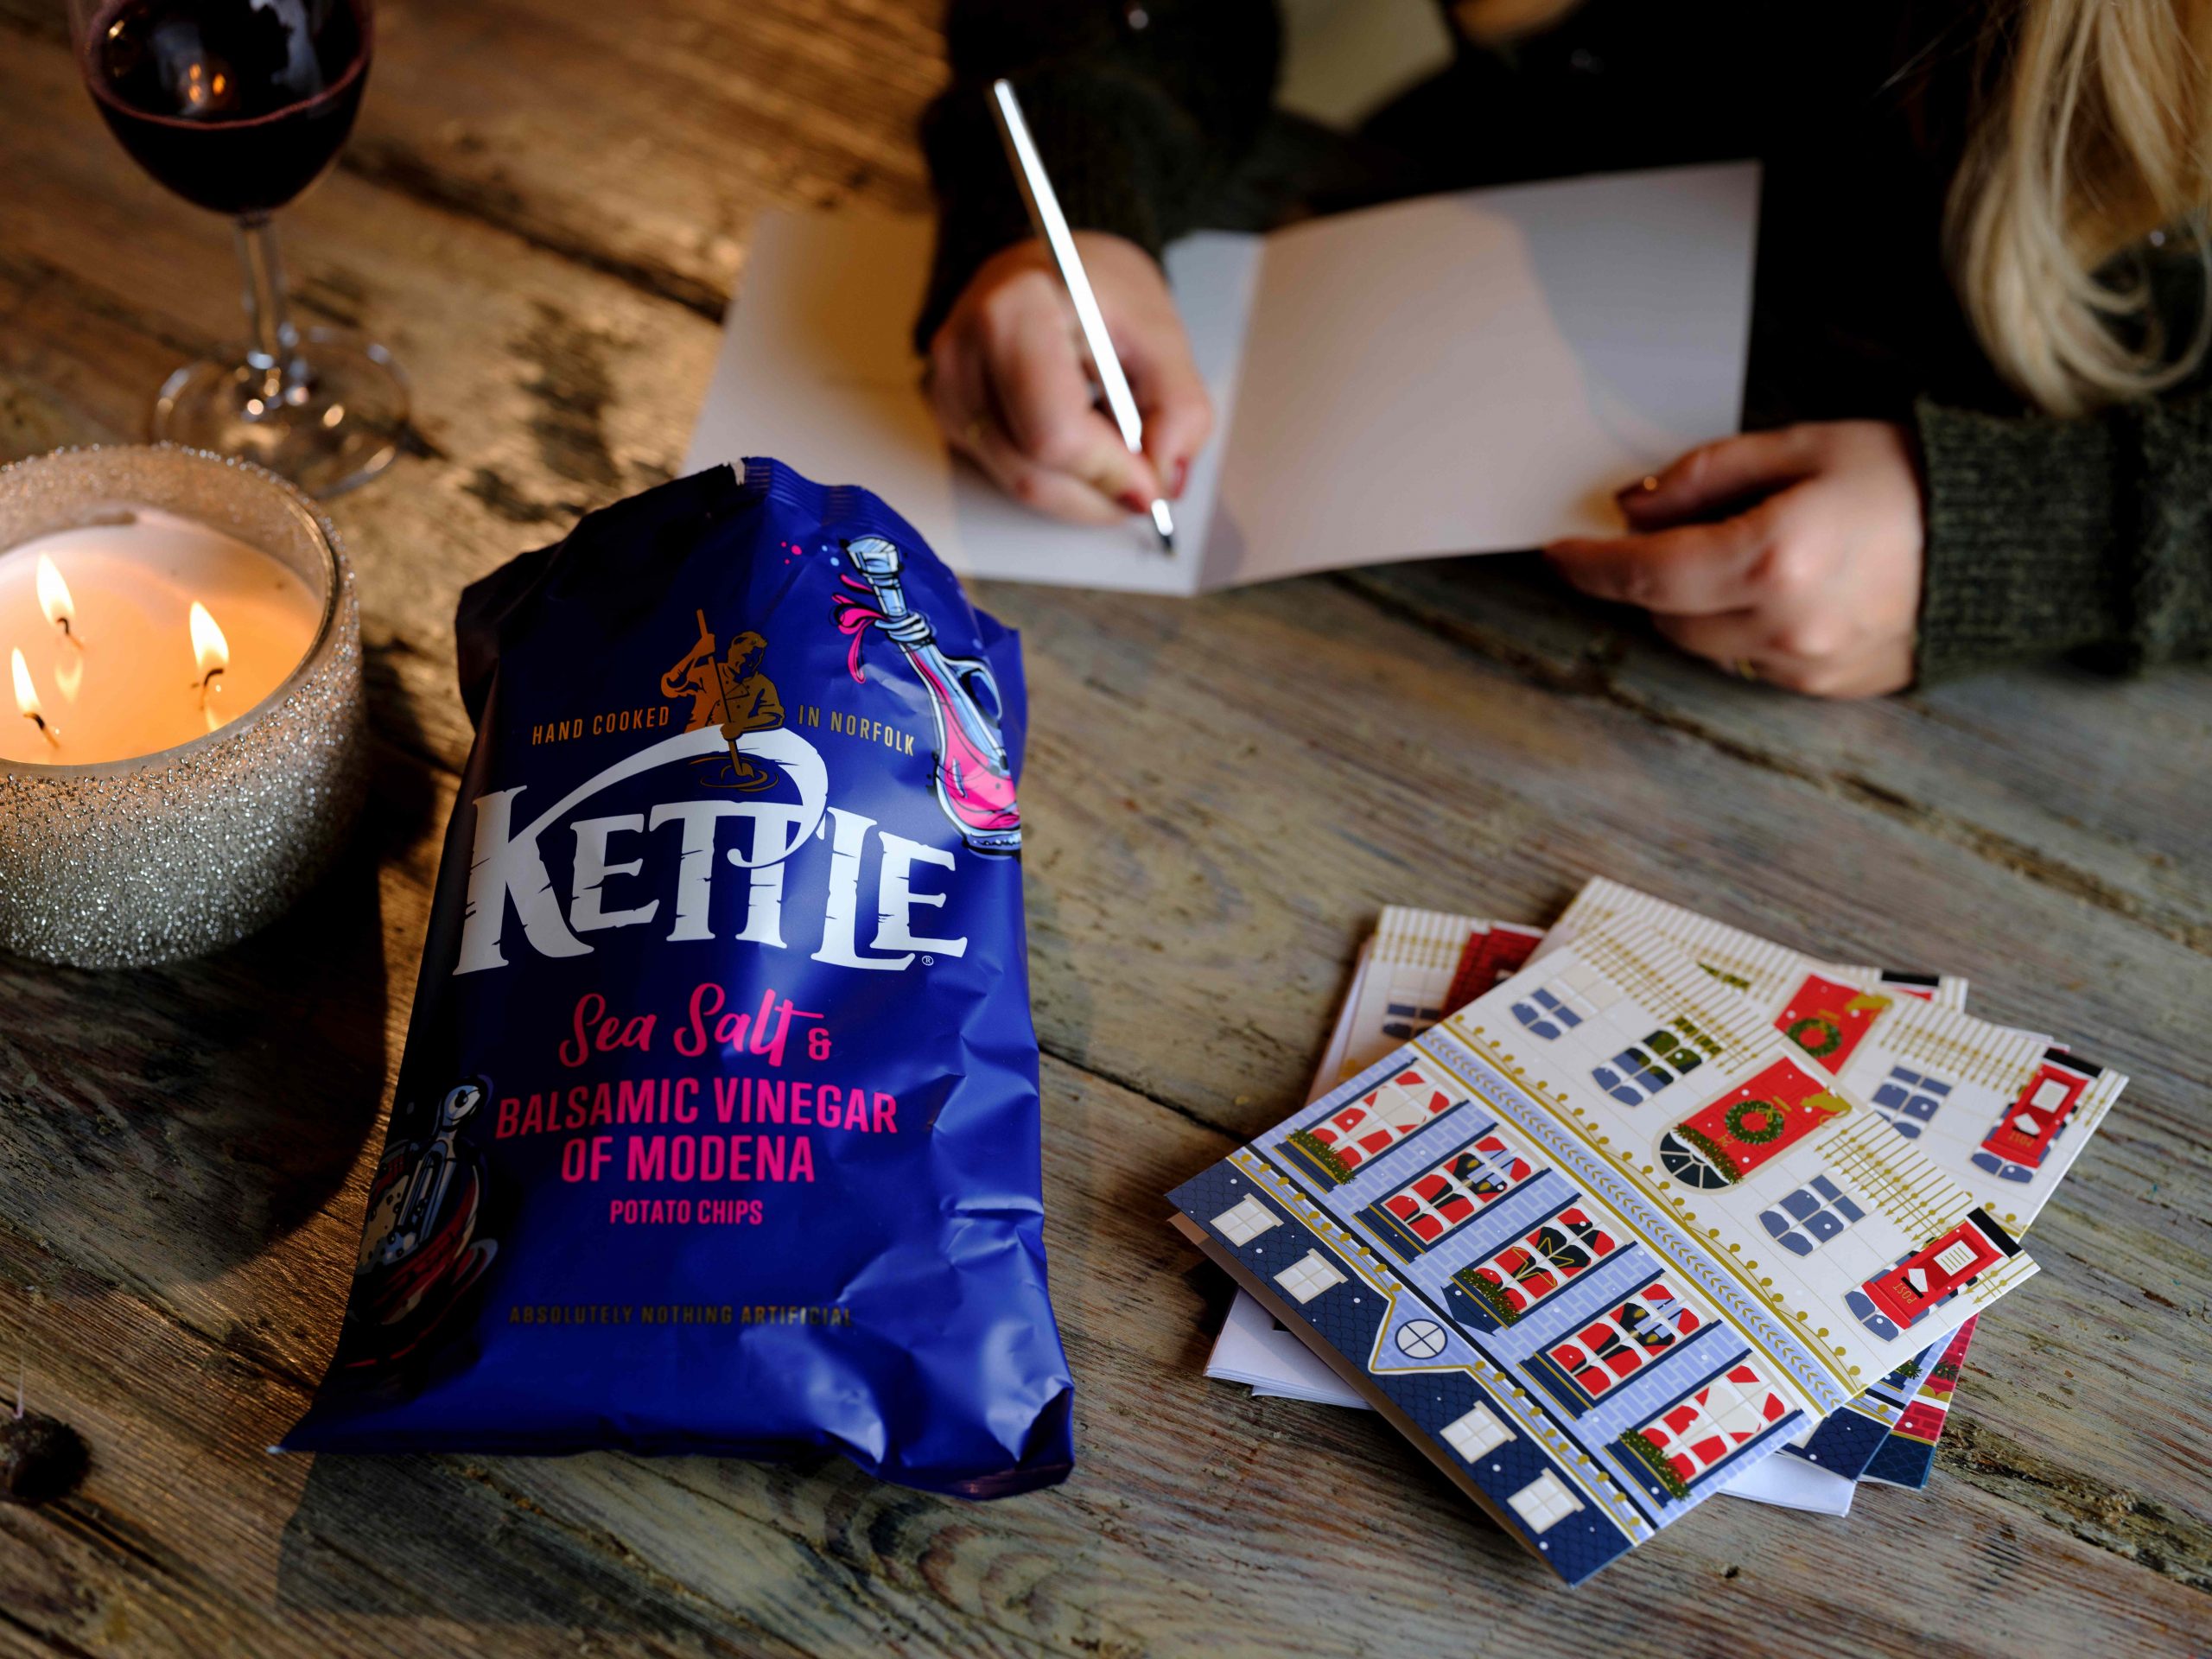 Kettle launches £500,000 Christmas campaign